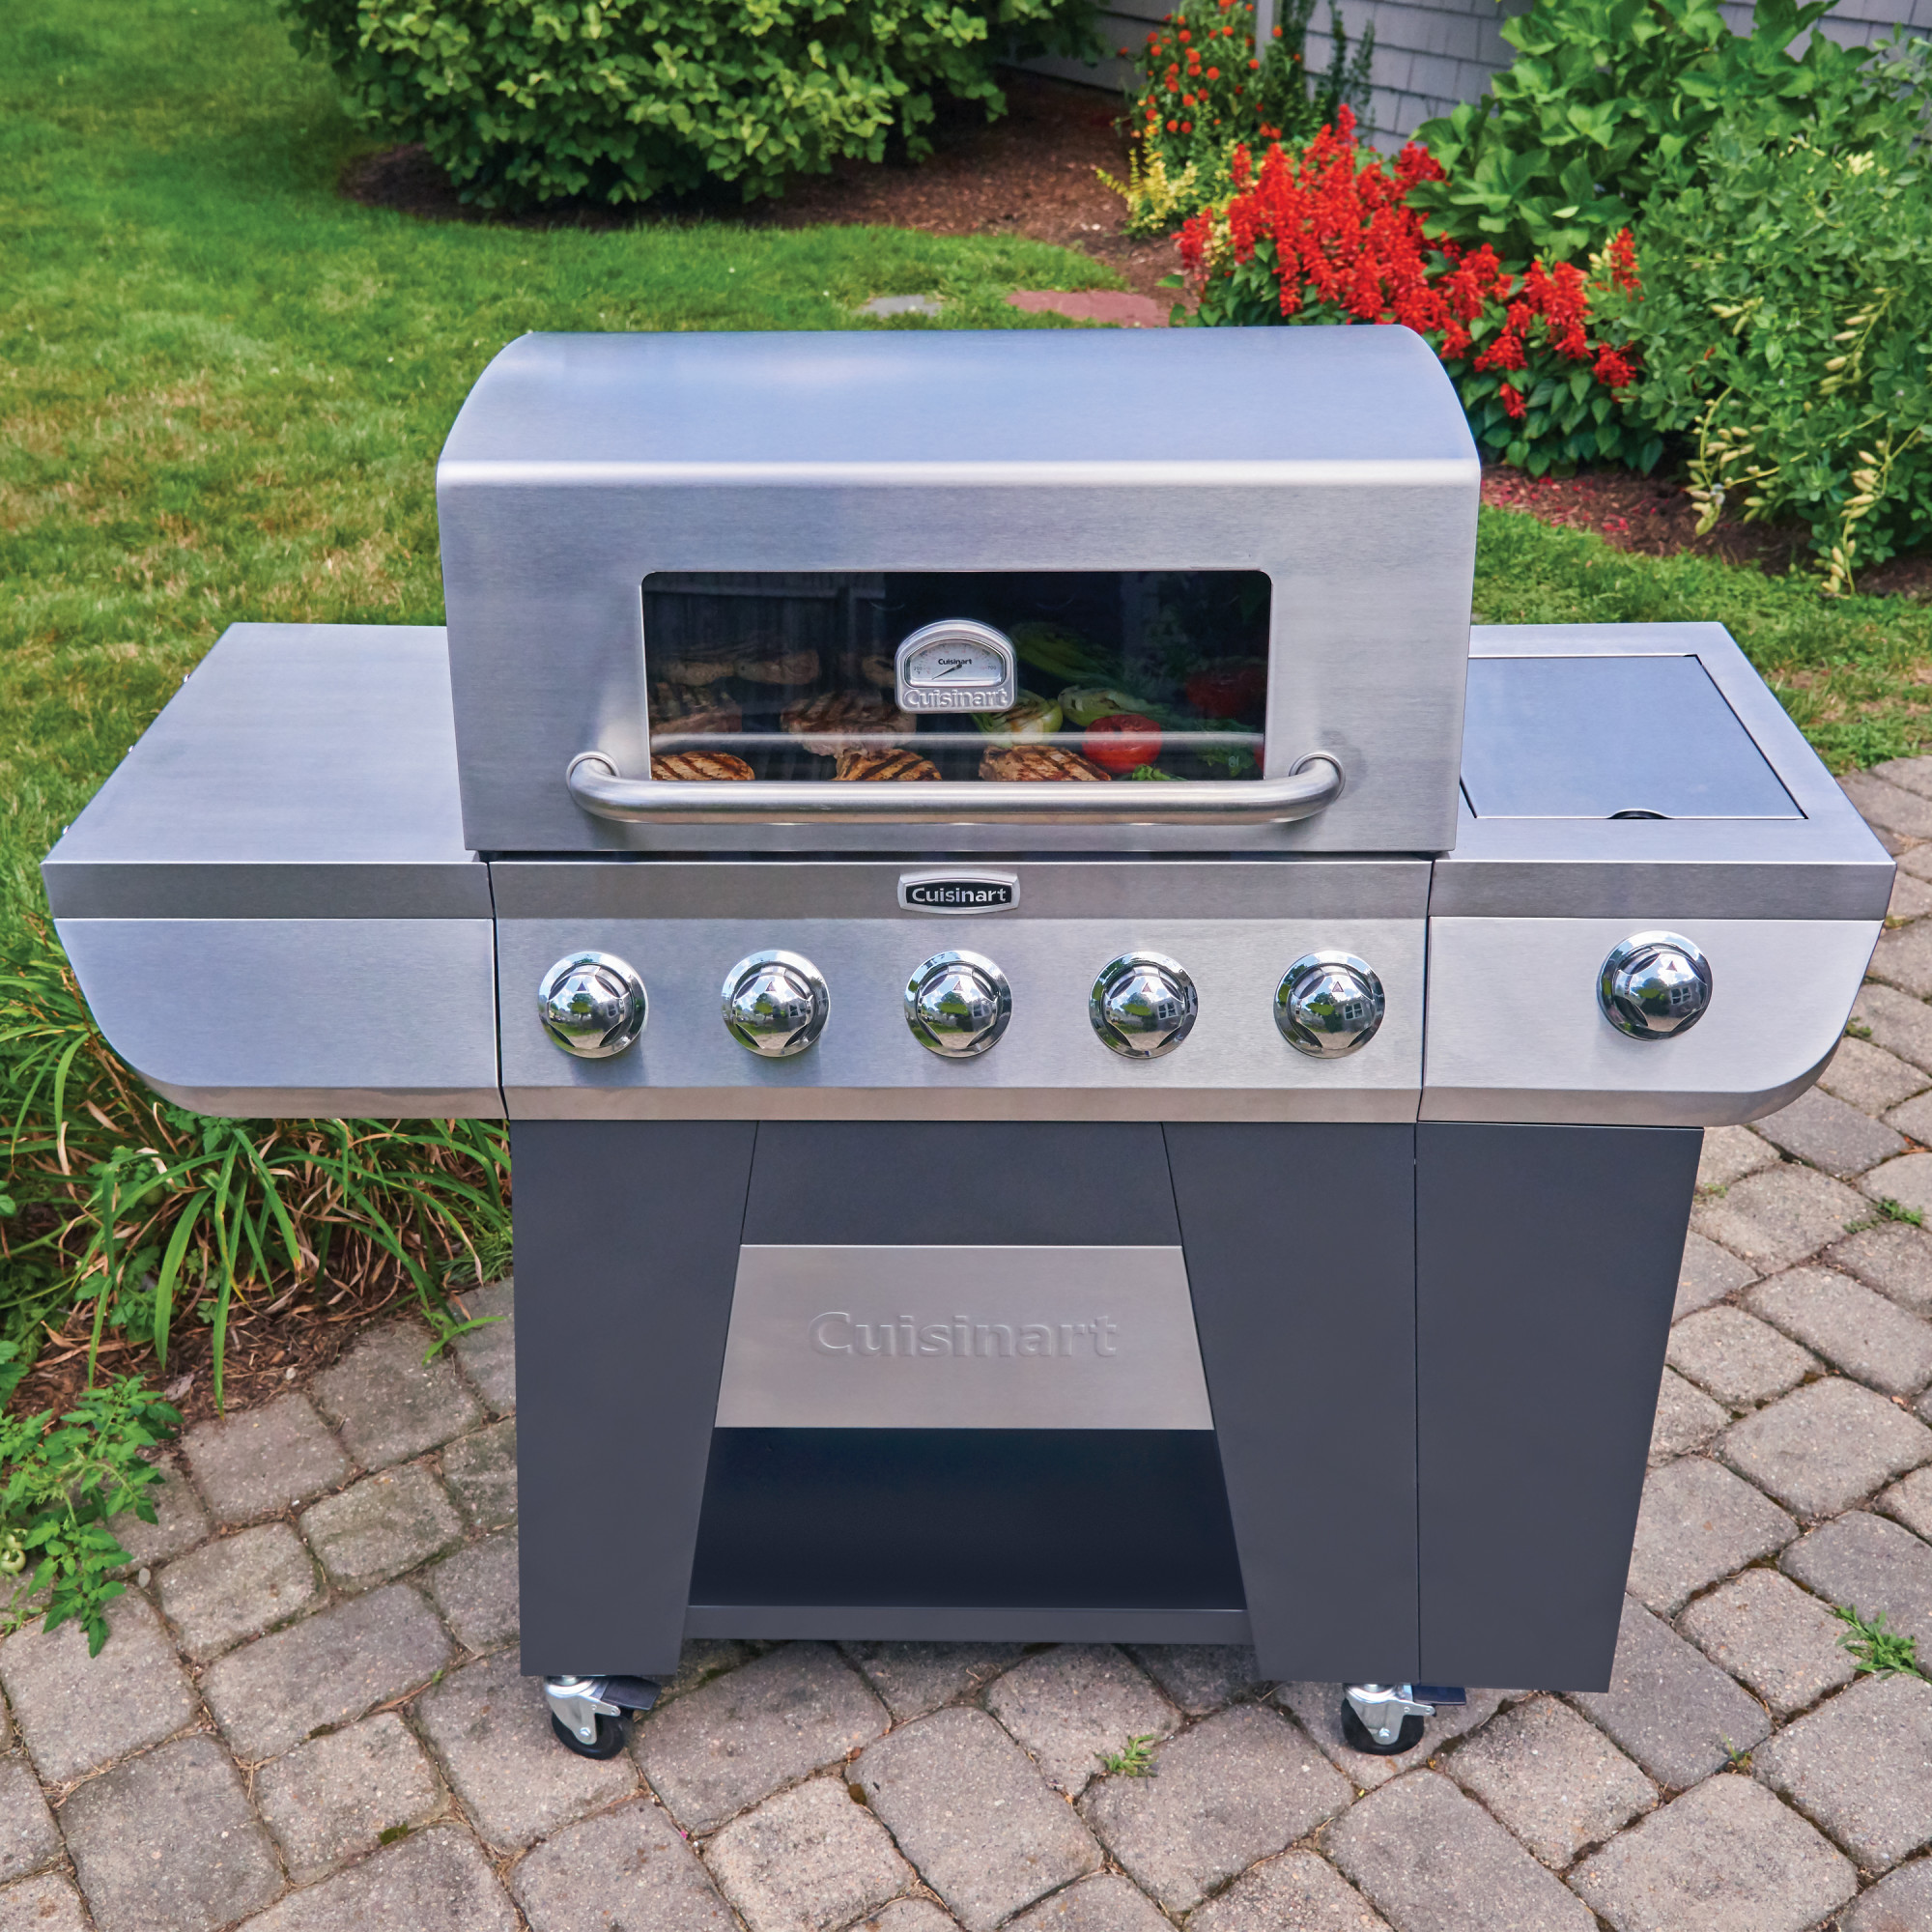 Cuisinart 3-In-1 Stainless Five-Burner Propane Gas Grill with Side Burner - image 2 of 14